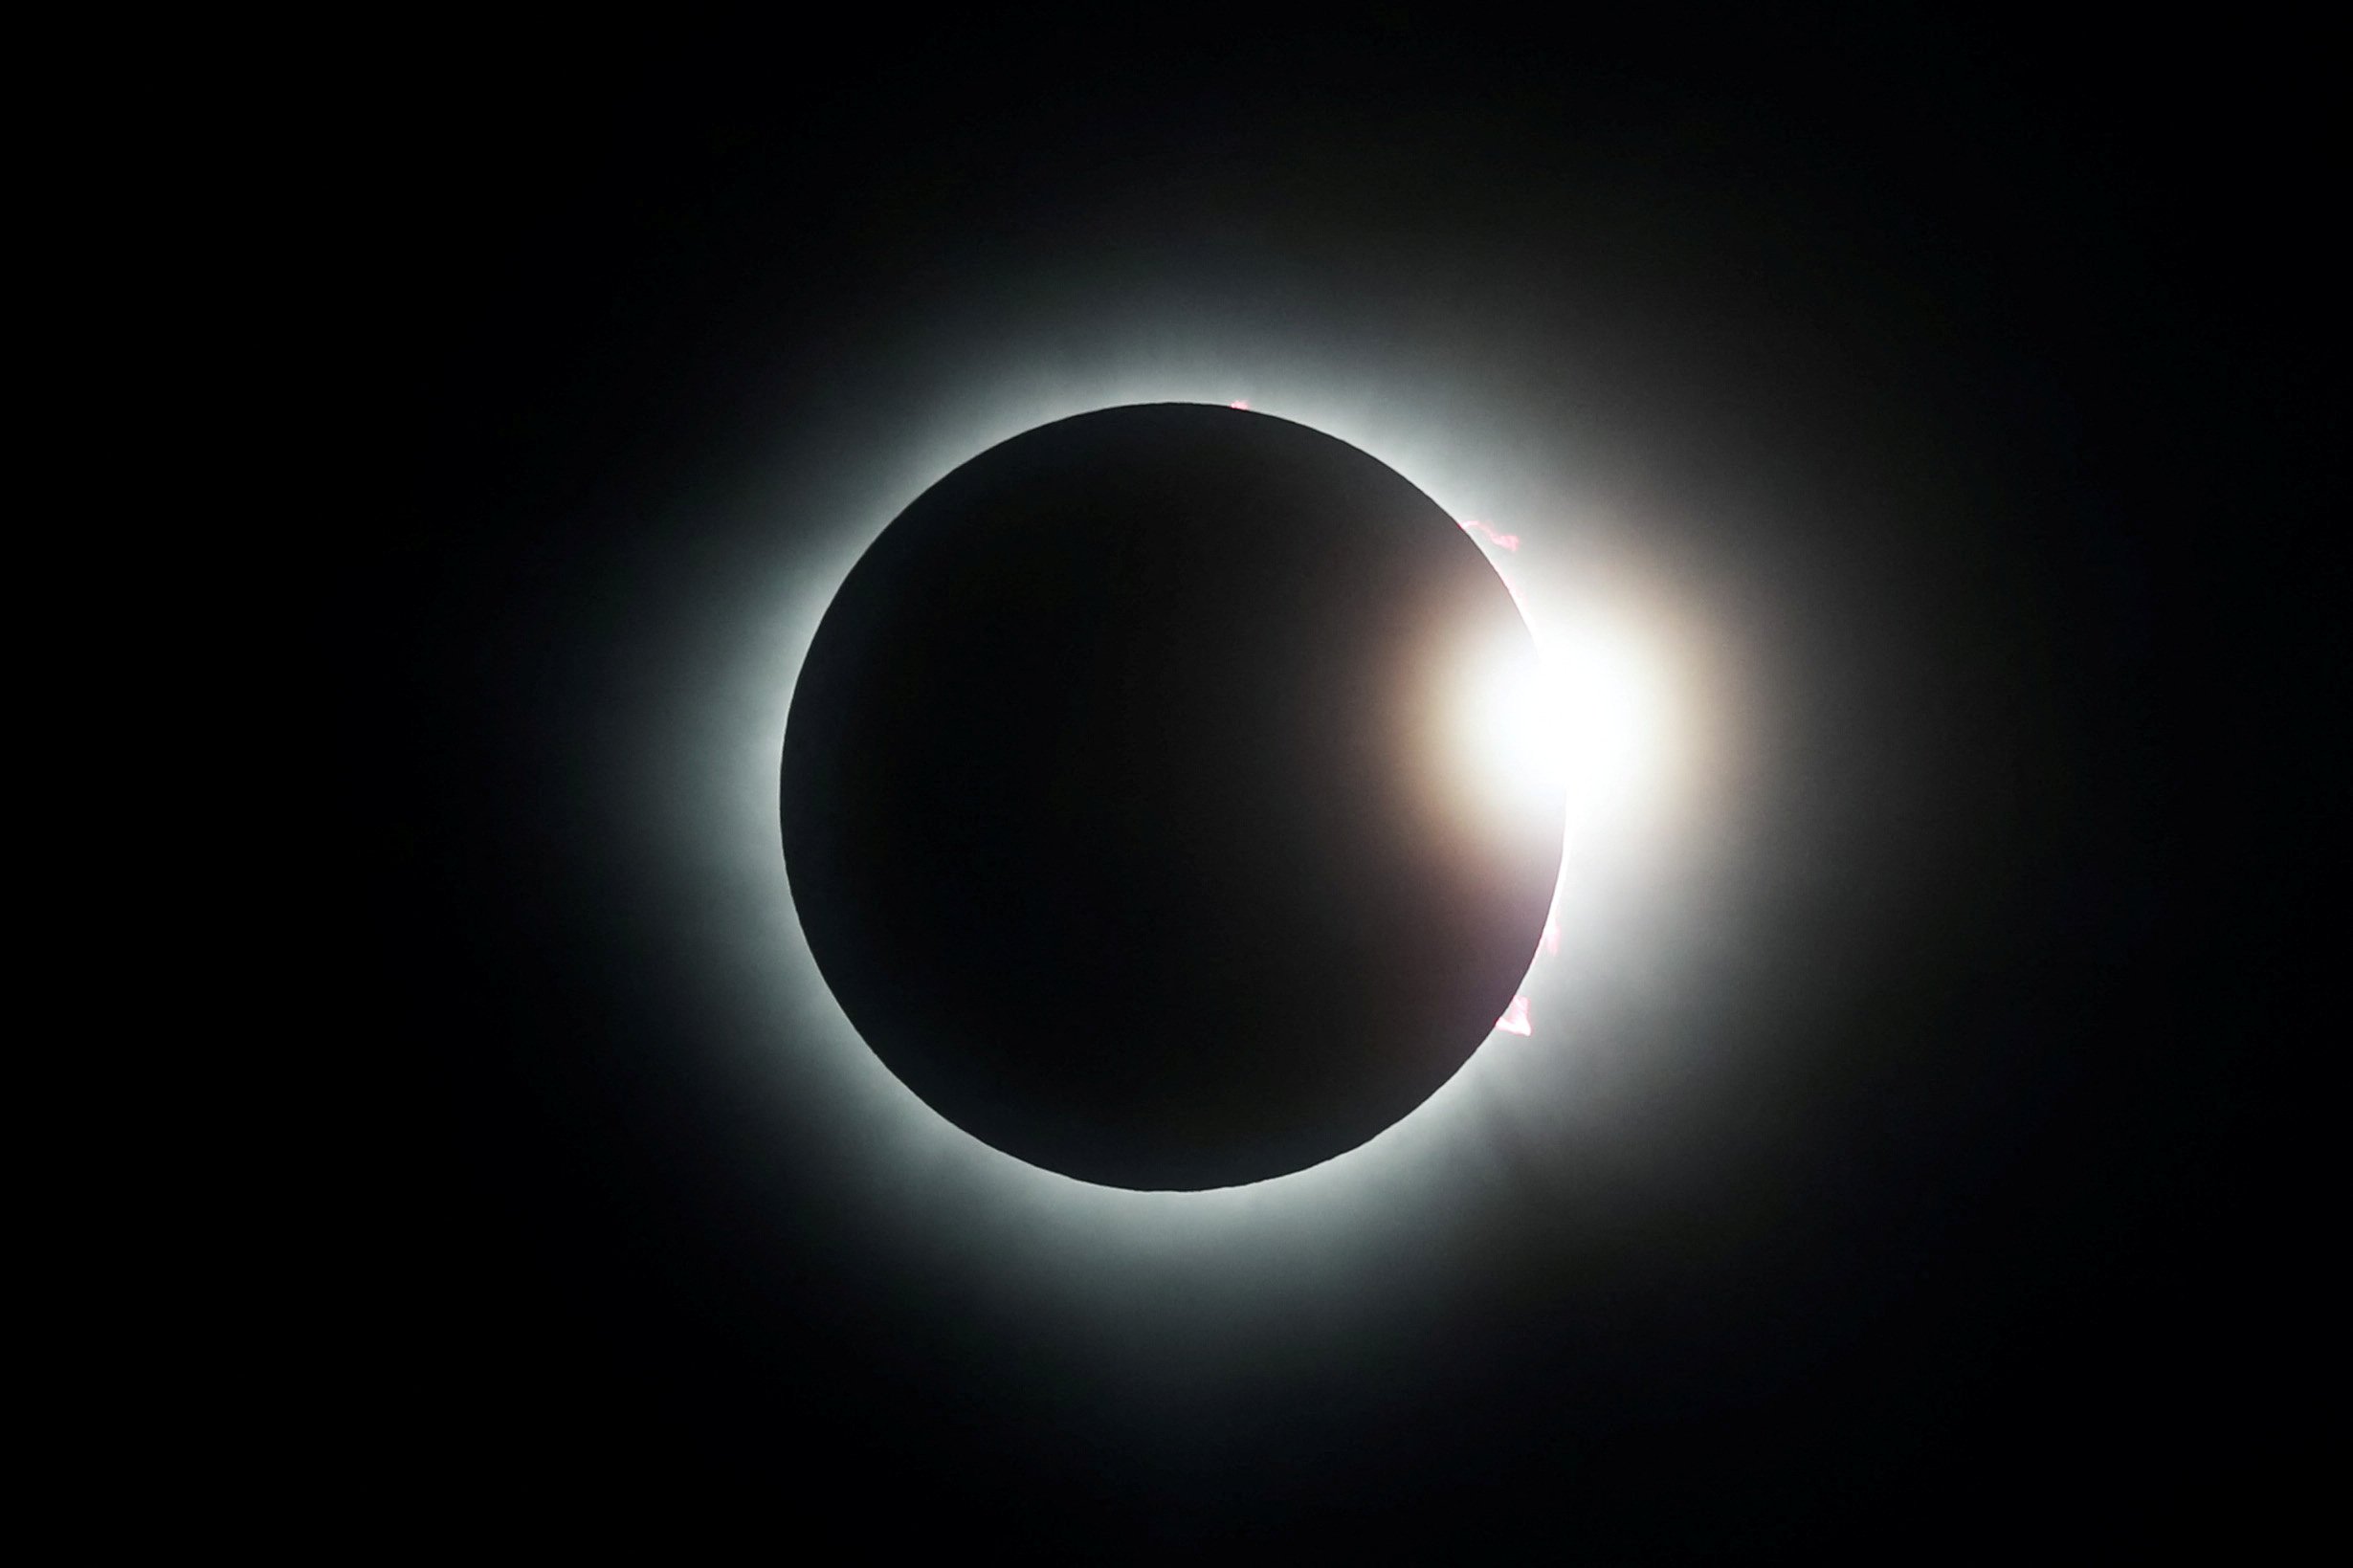 When is the next solar eclipse in the UK?